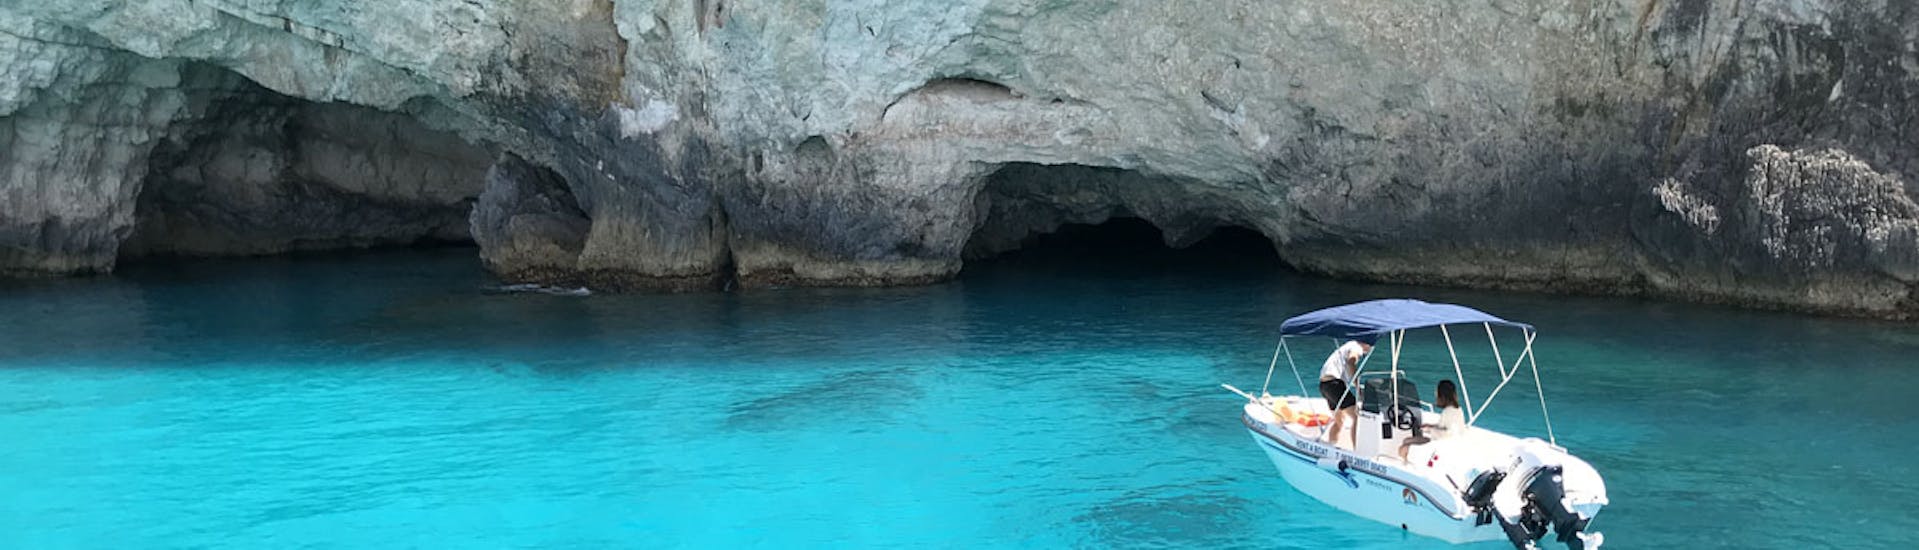 Private boat rented from Porto Vromi Maries anchored in front of small caves.